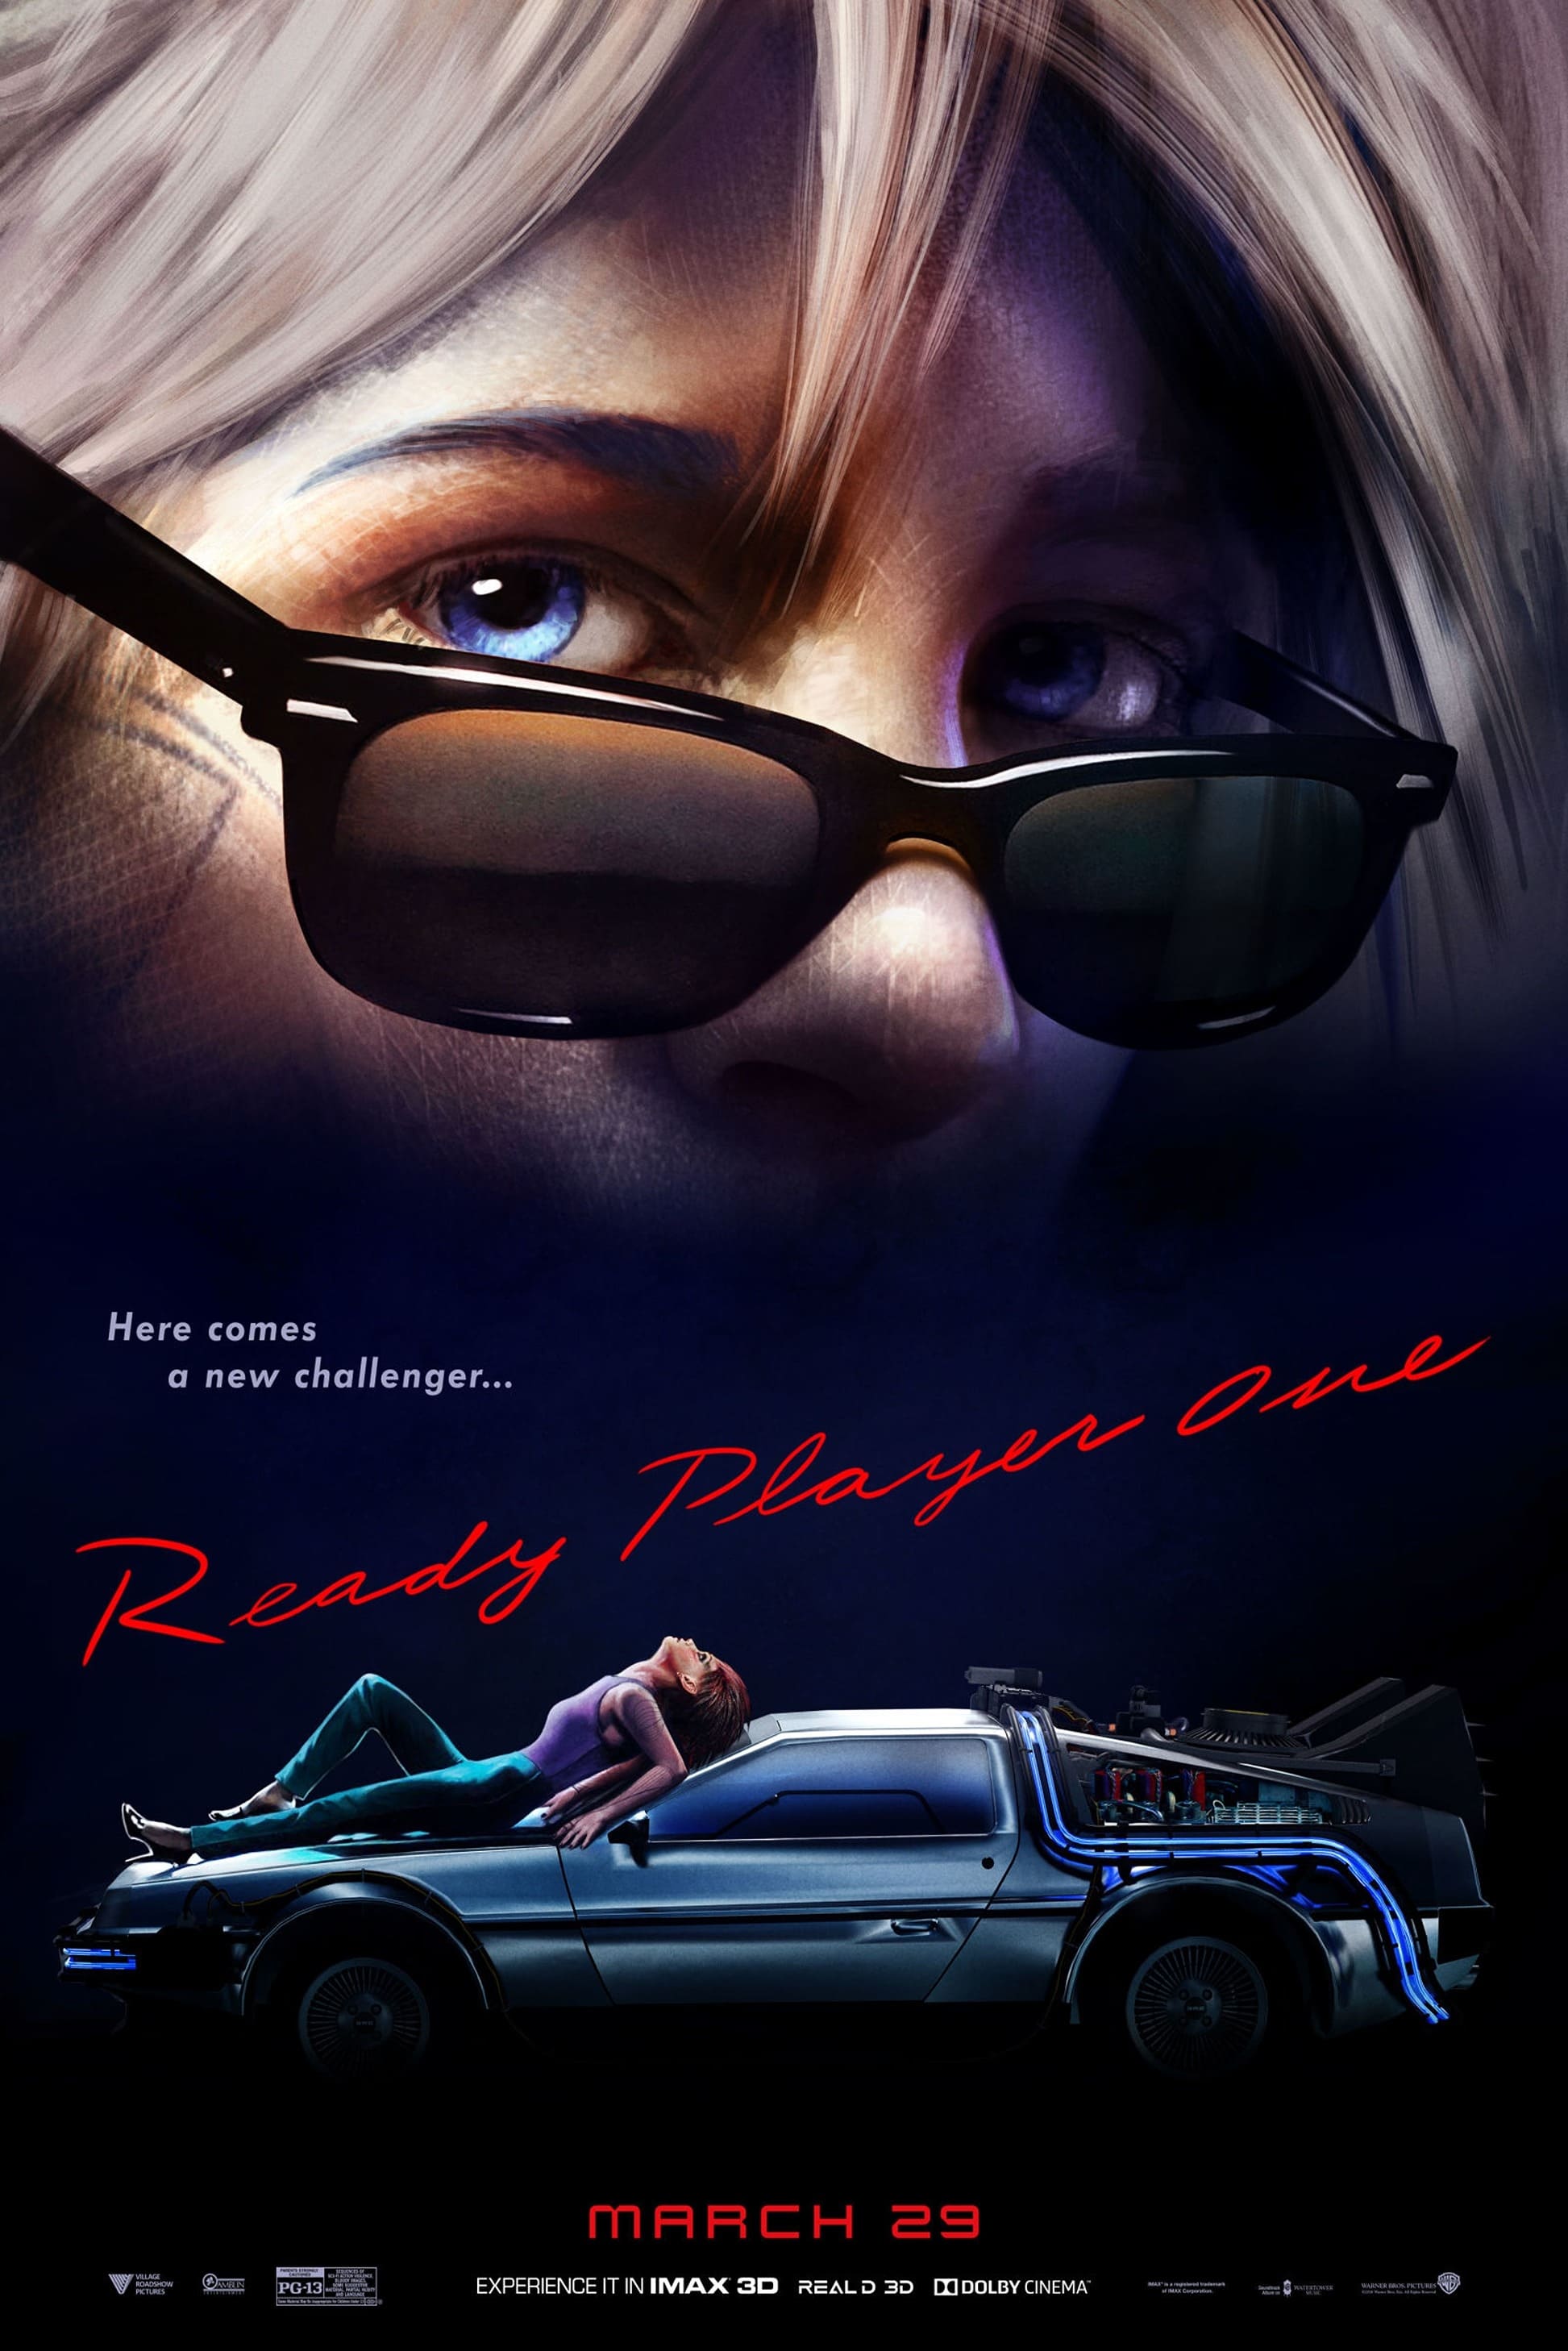 Ready Player One (2018) REMUX 4K HDR Latino – CMHDD